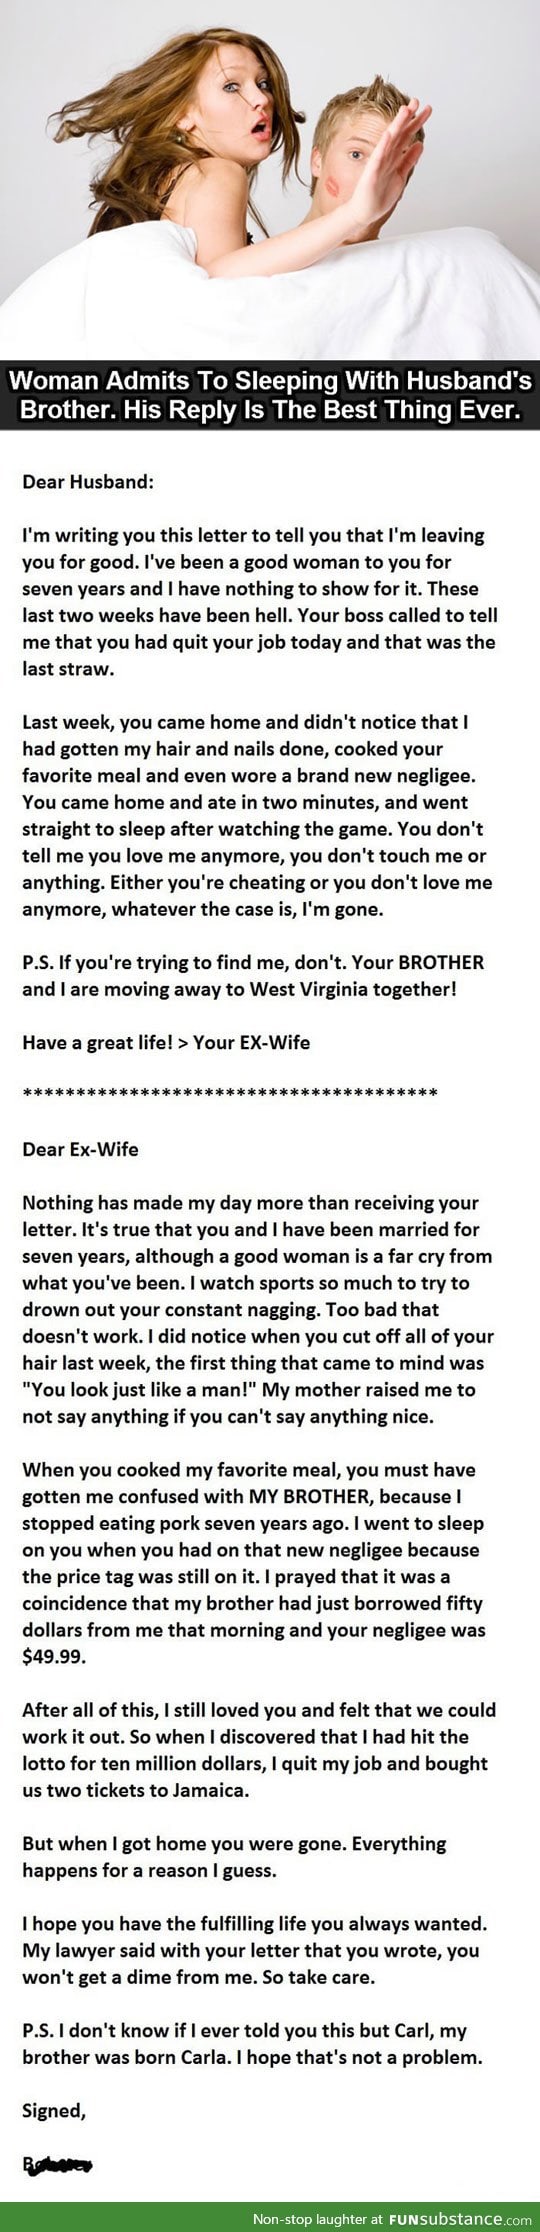 The best affair reply ever